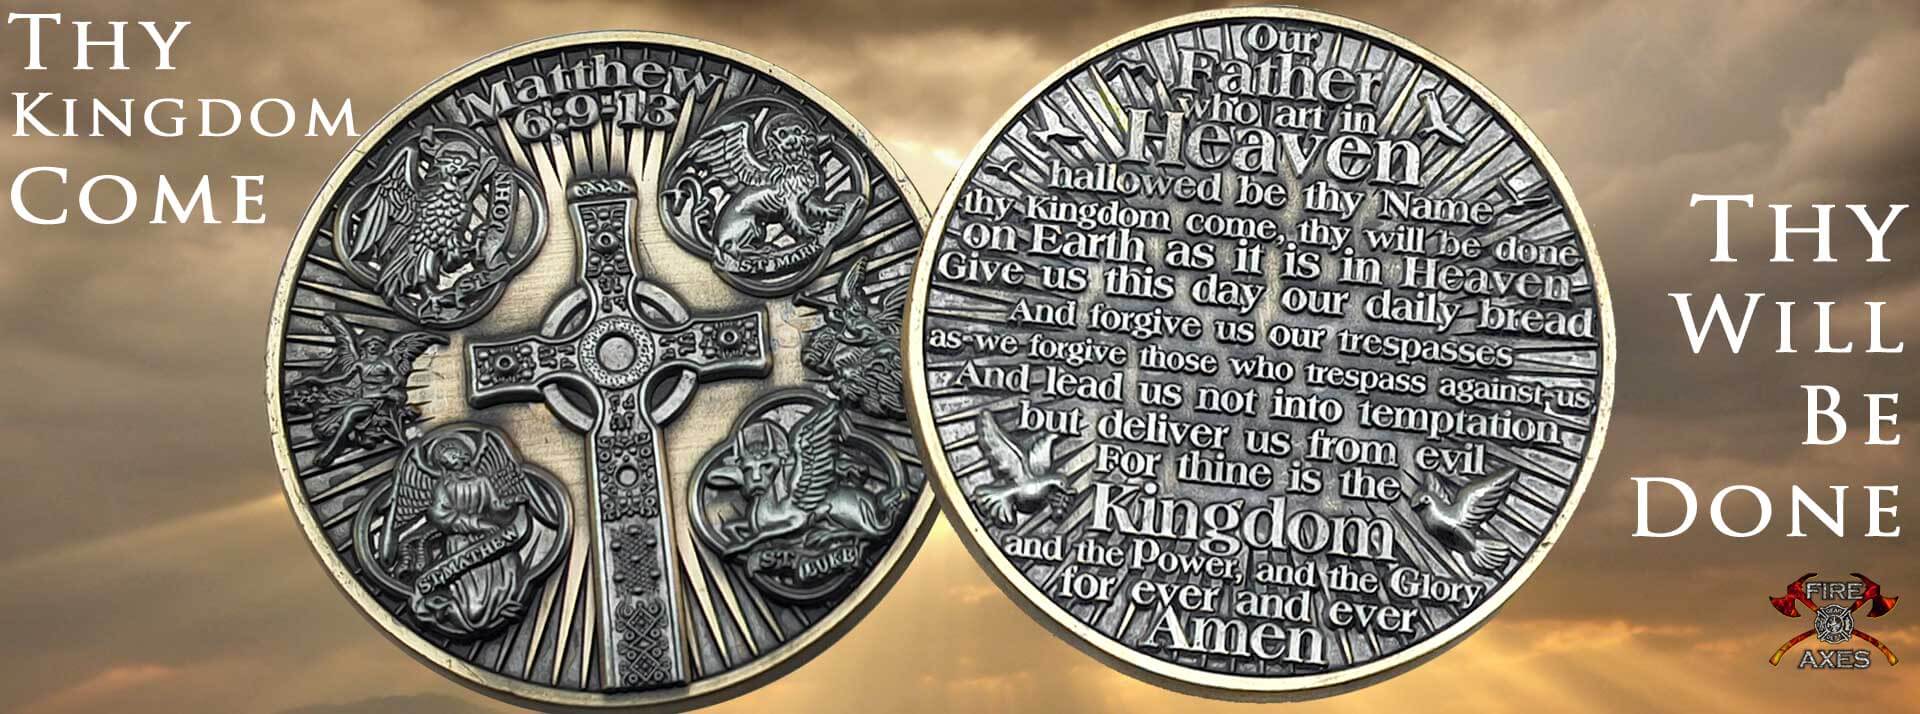 Fire and Axes The Lords Prayer Coin